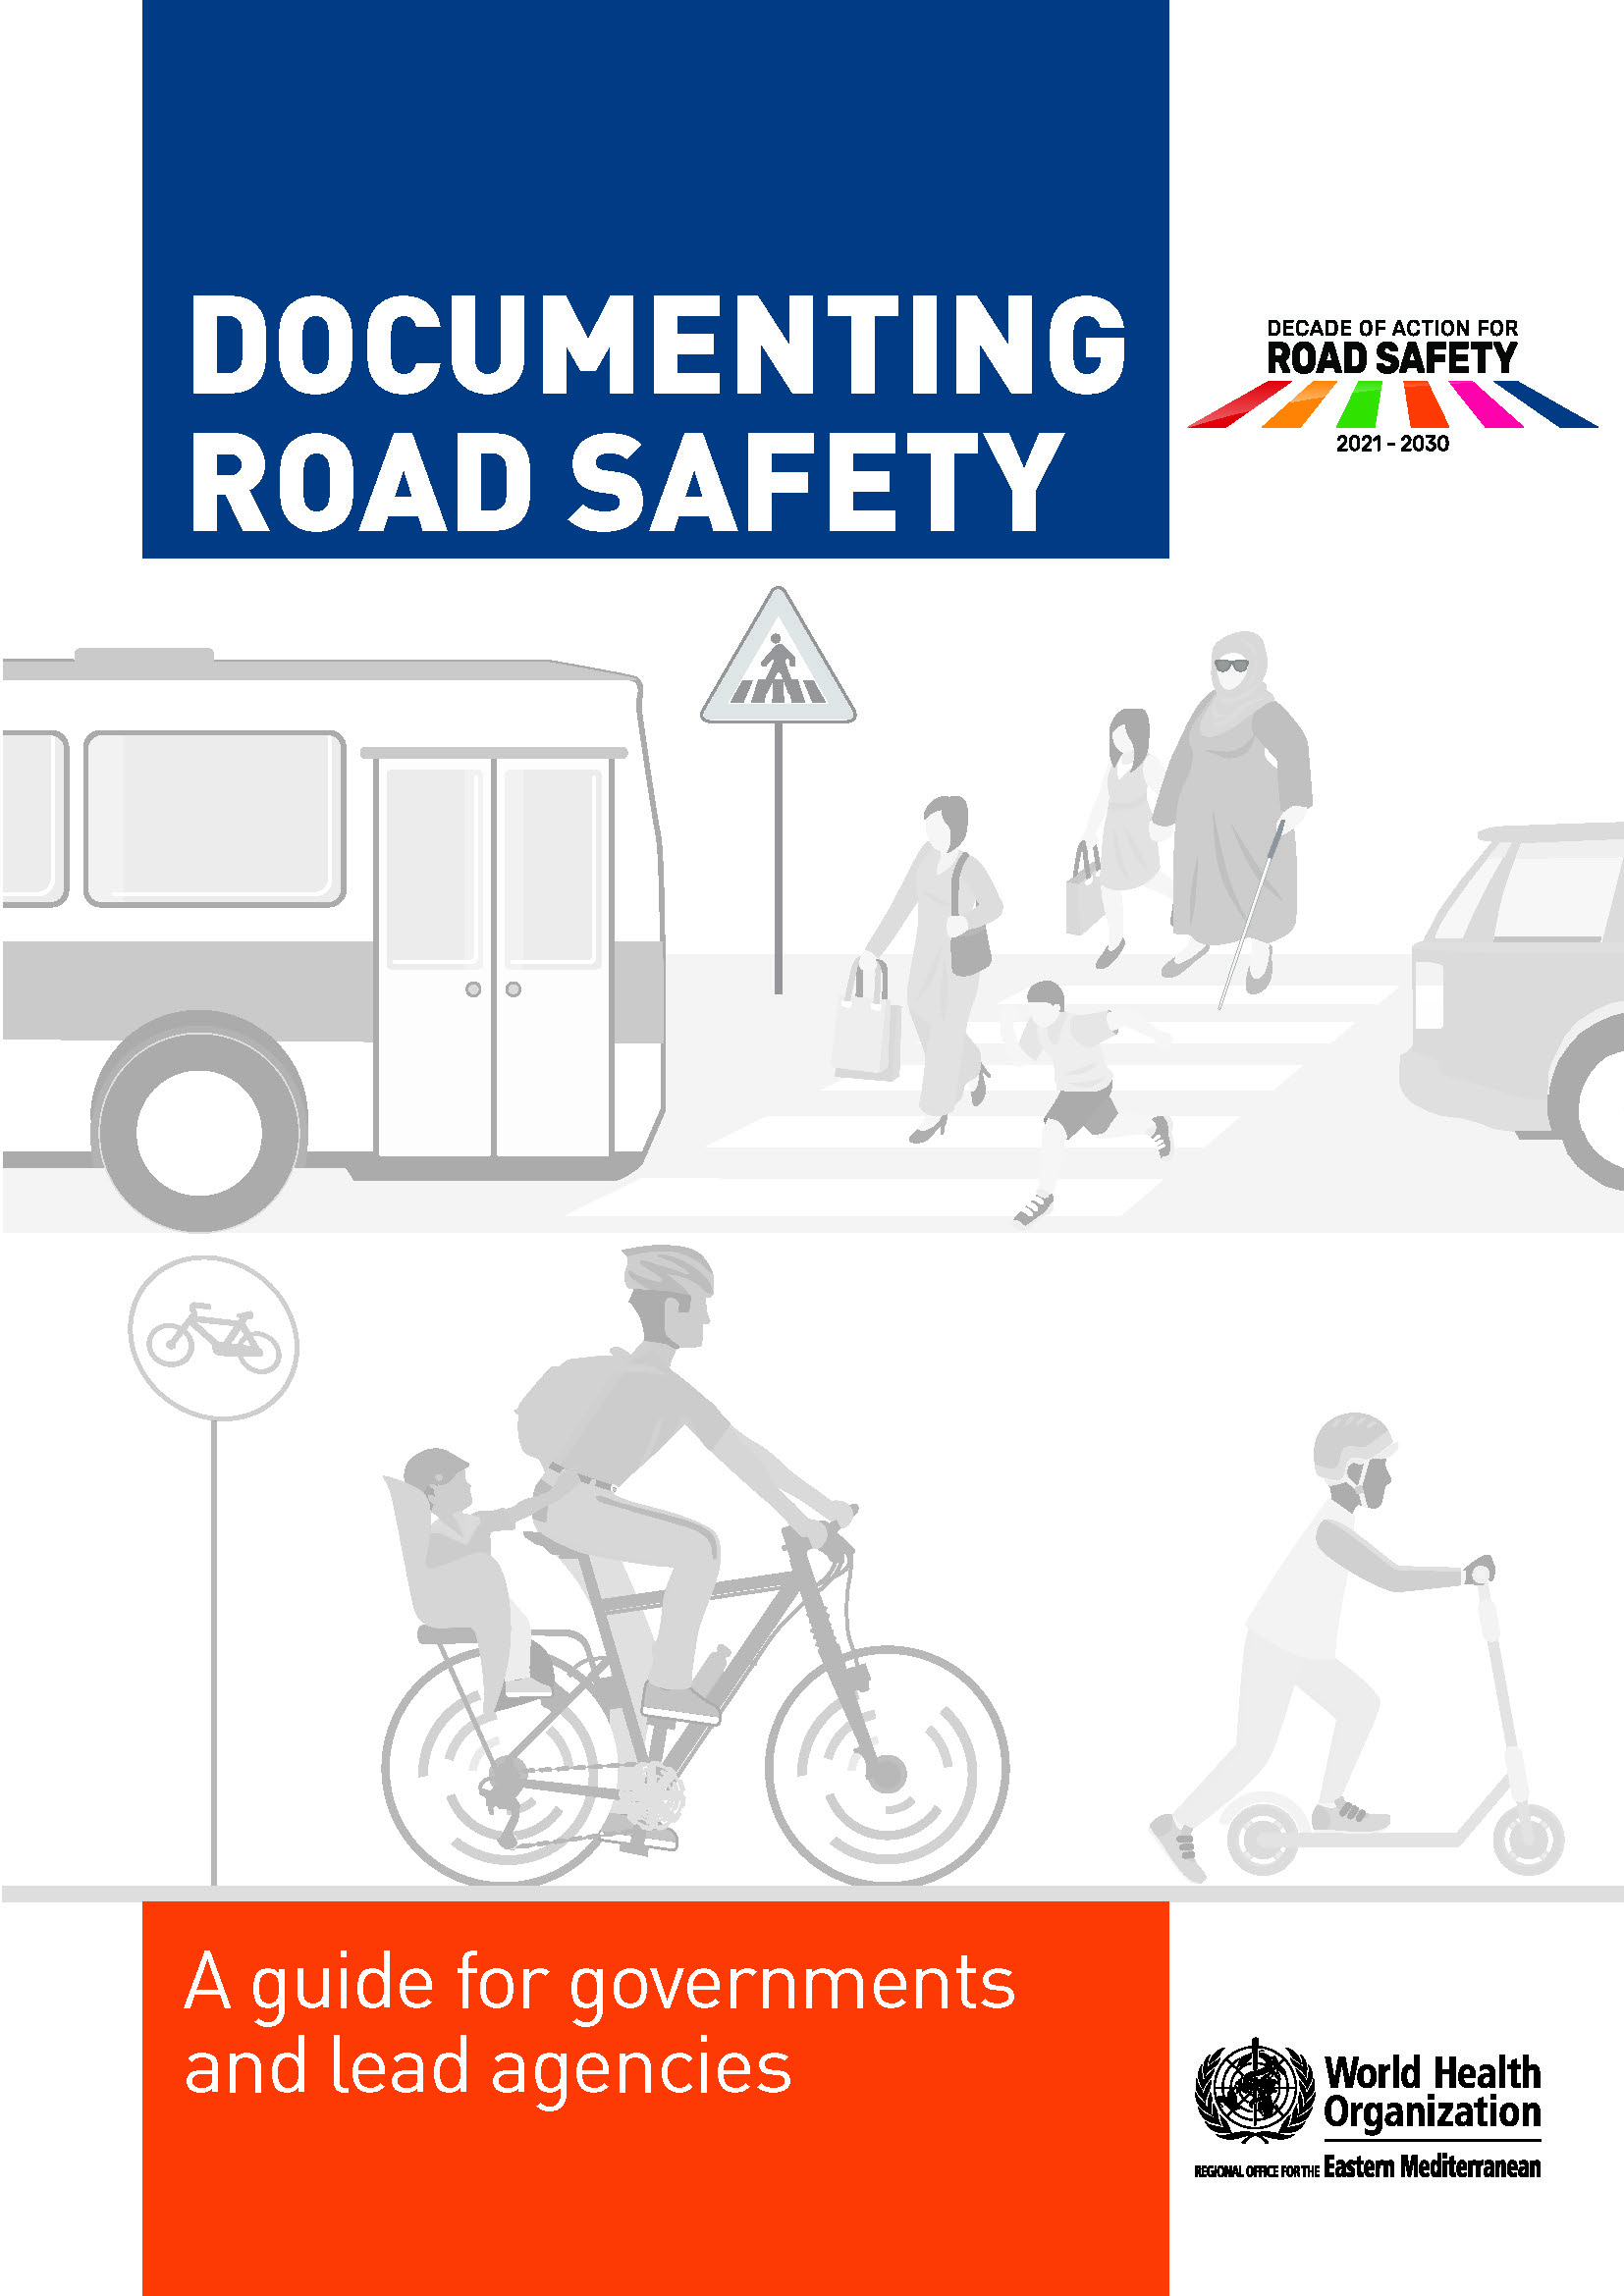 Documenting road safety: a guide for governments and lead agencies